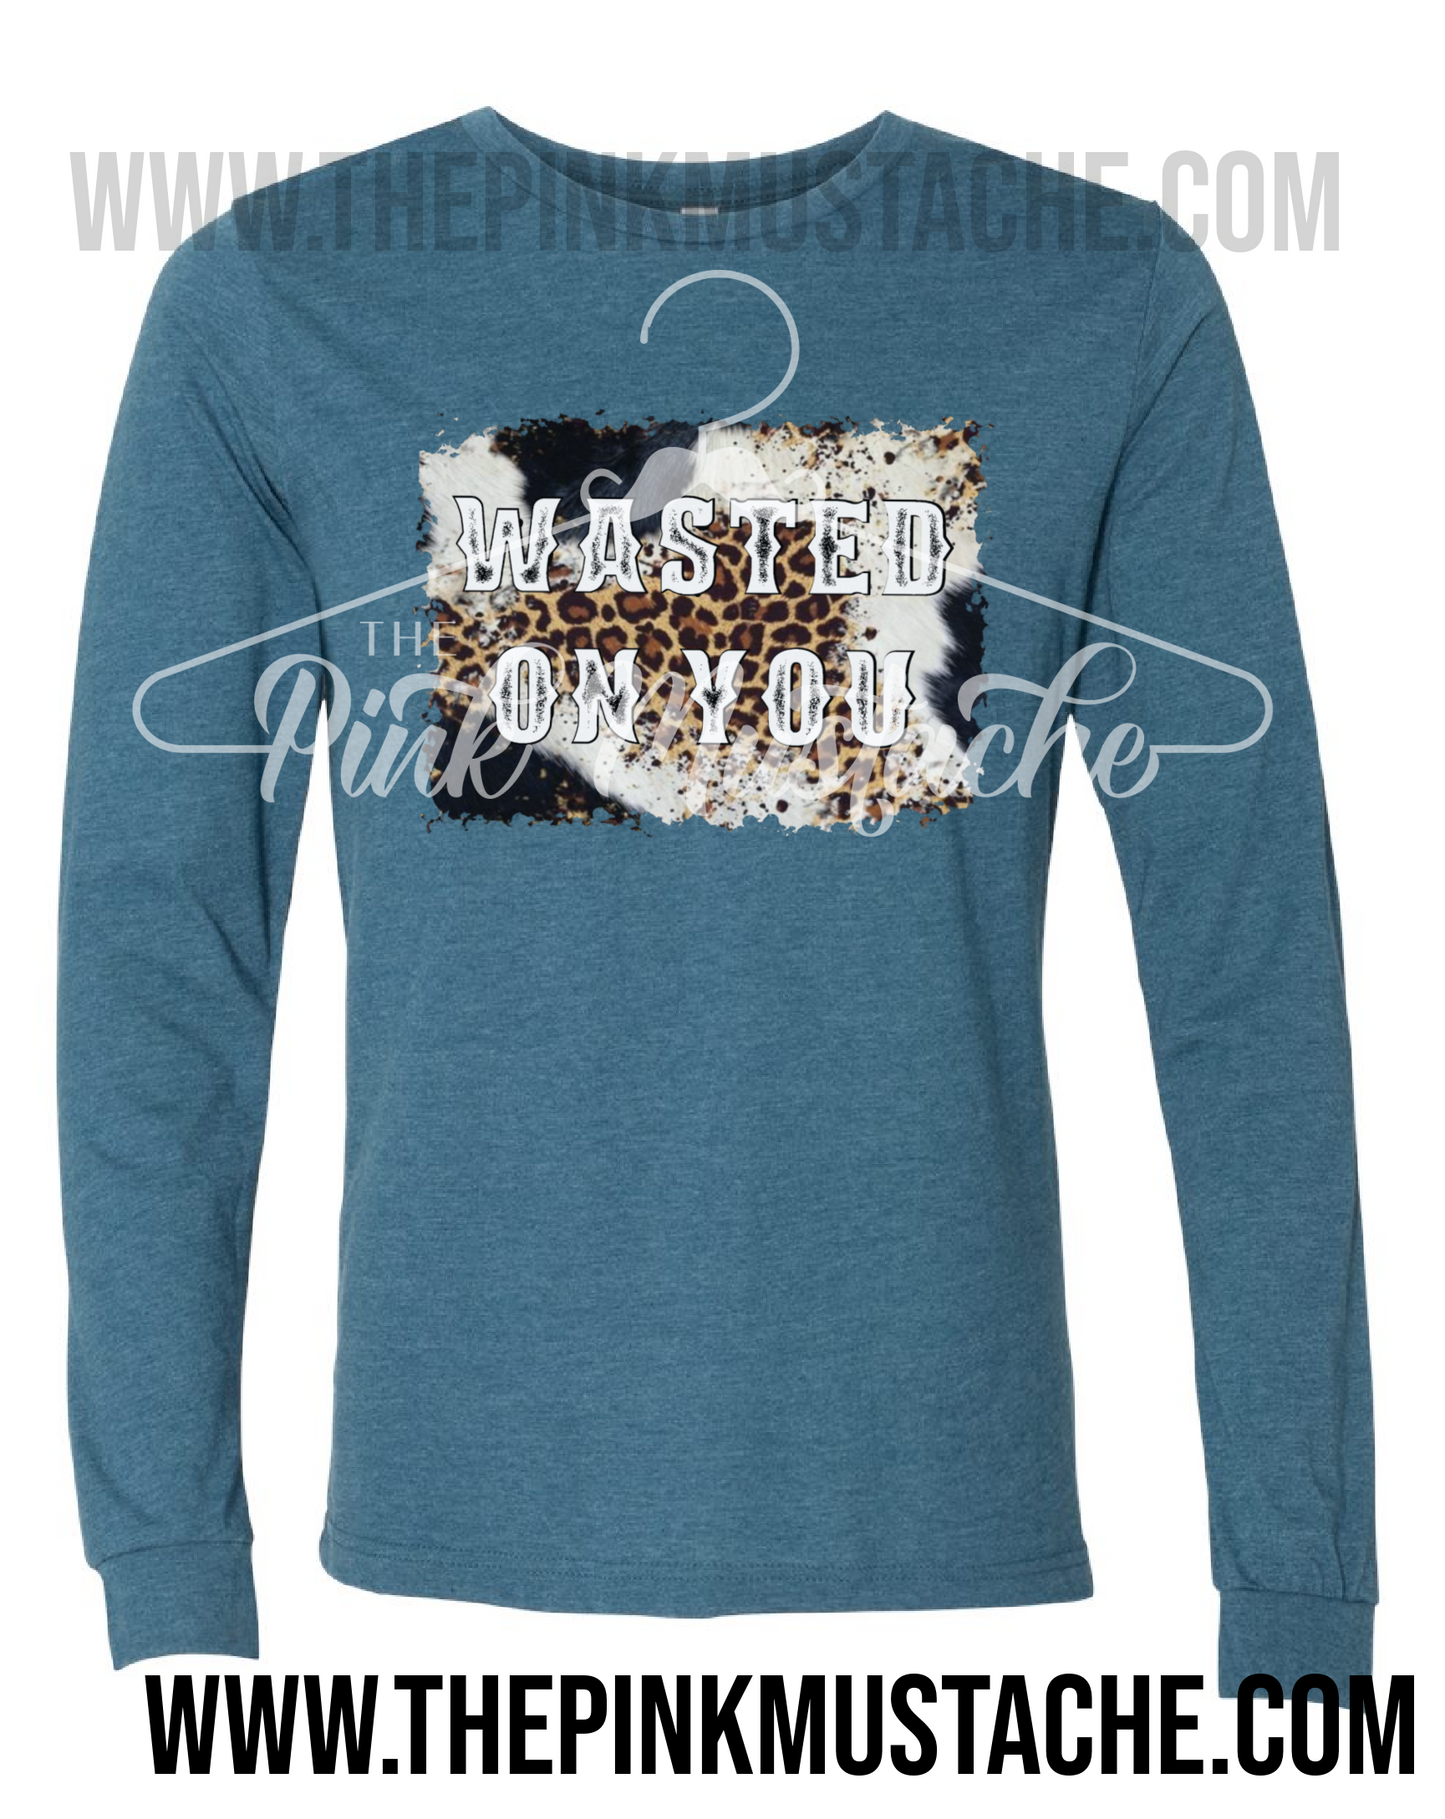 Long Sleeved Western Wasted Shirt/ Concert Shirt